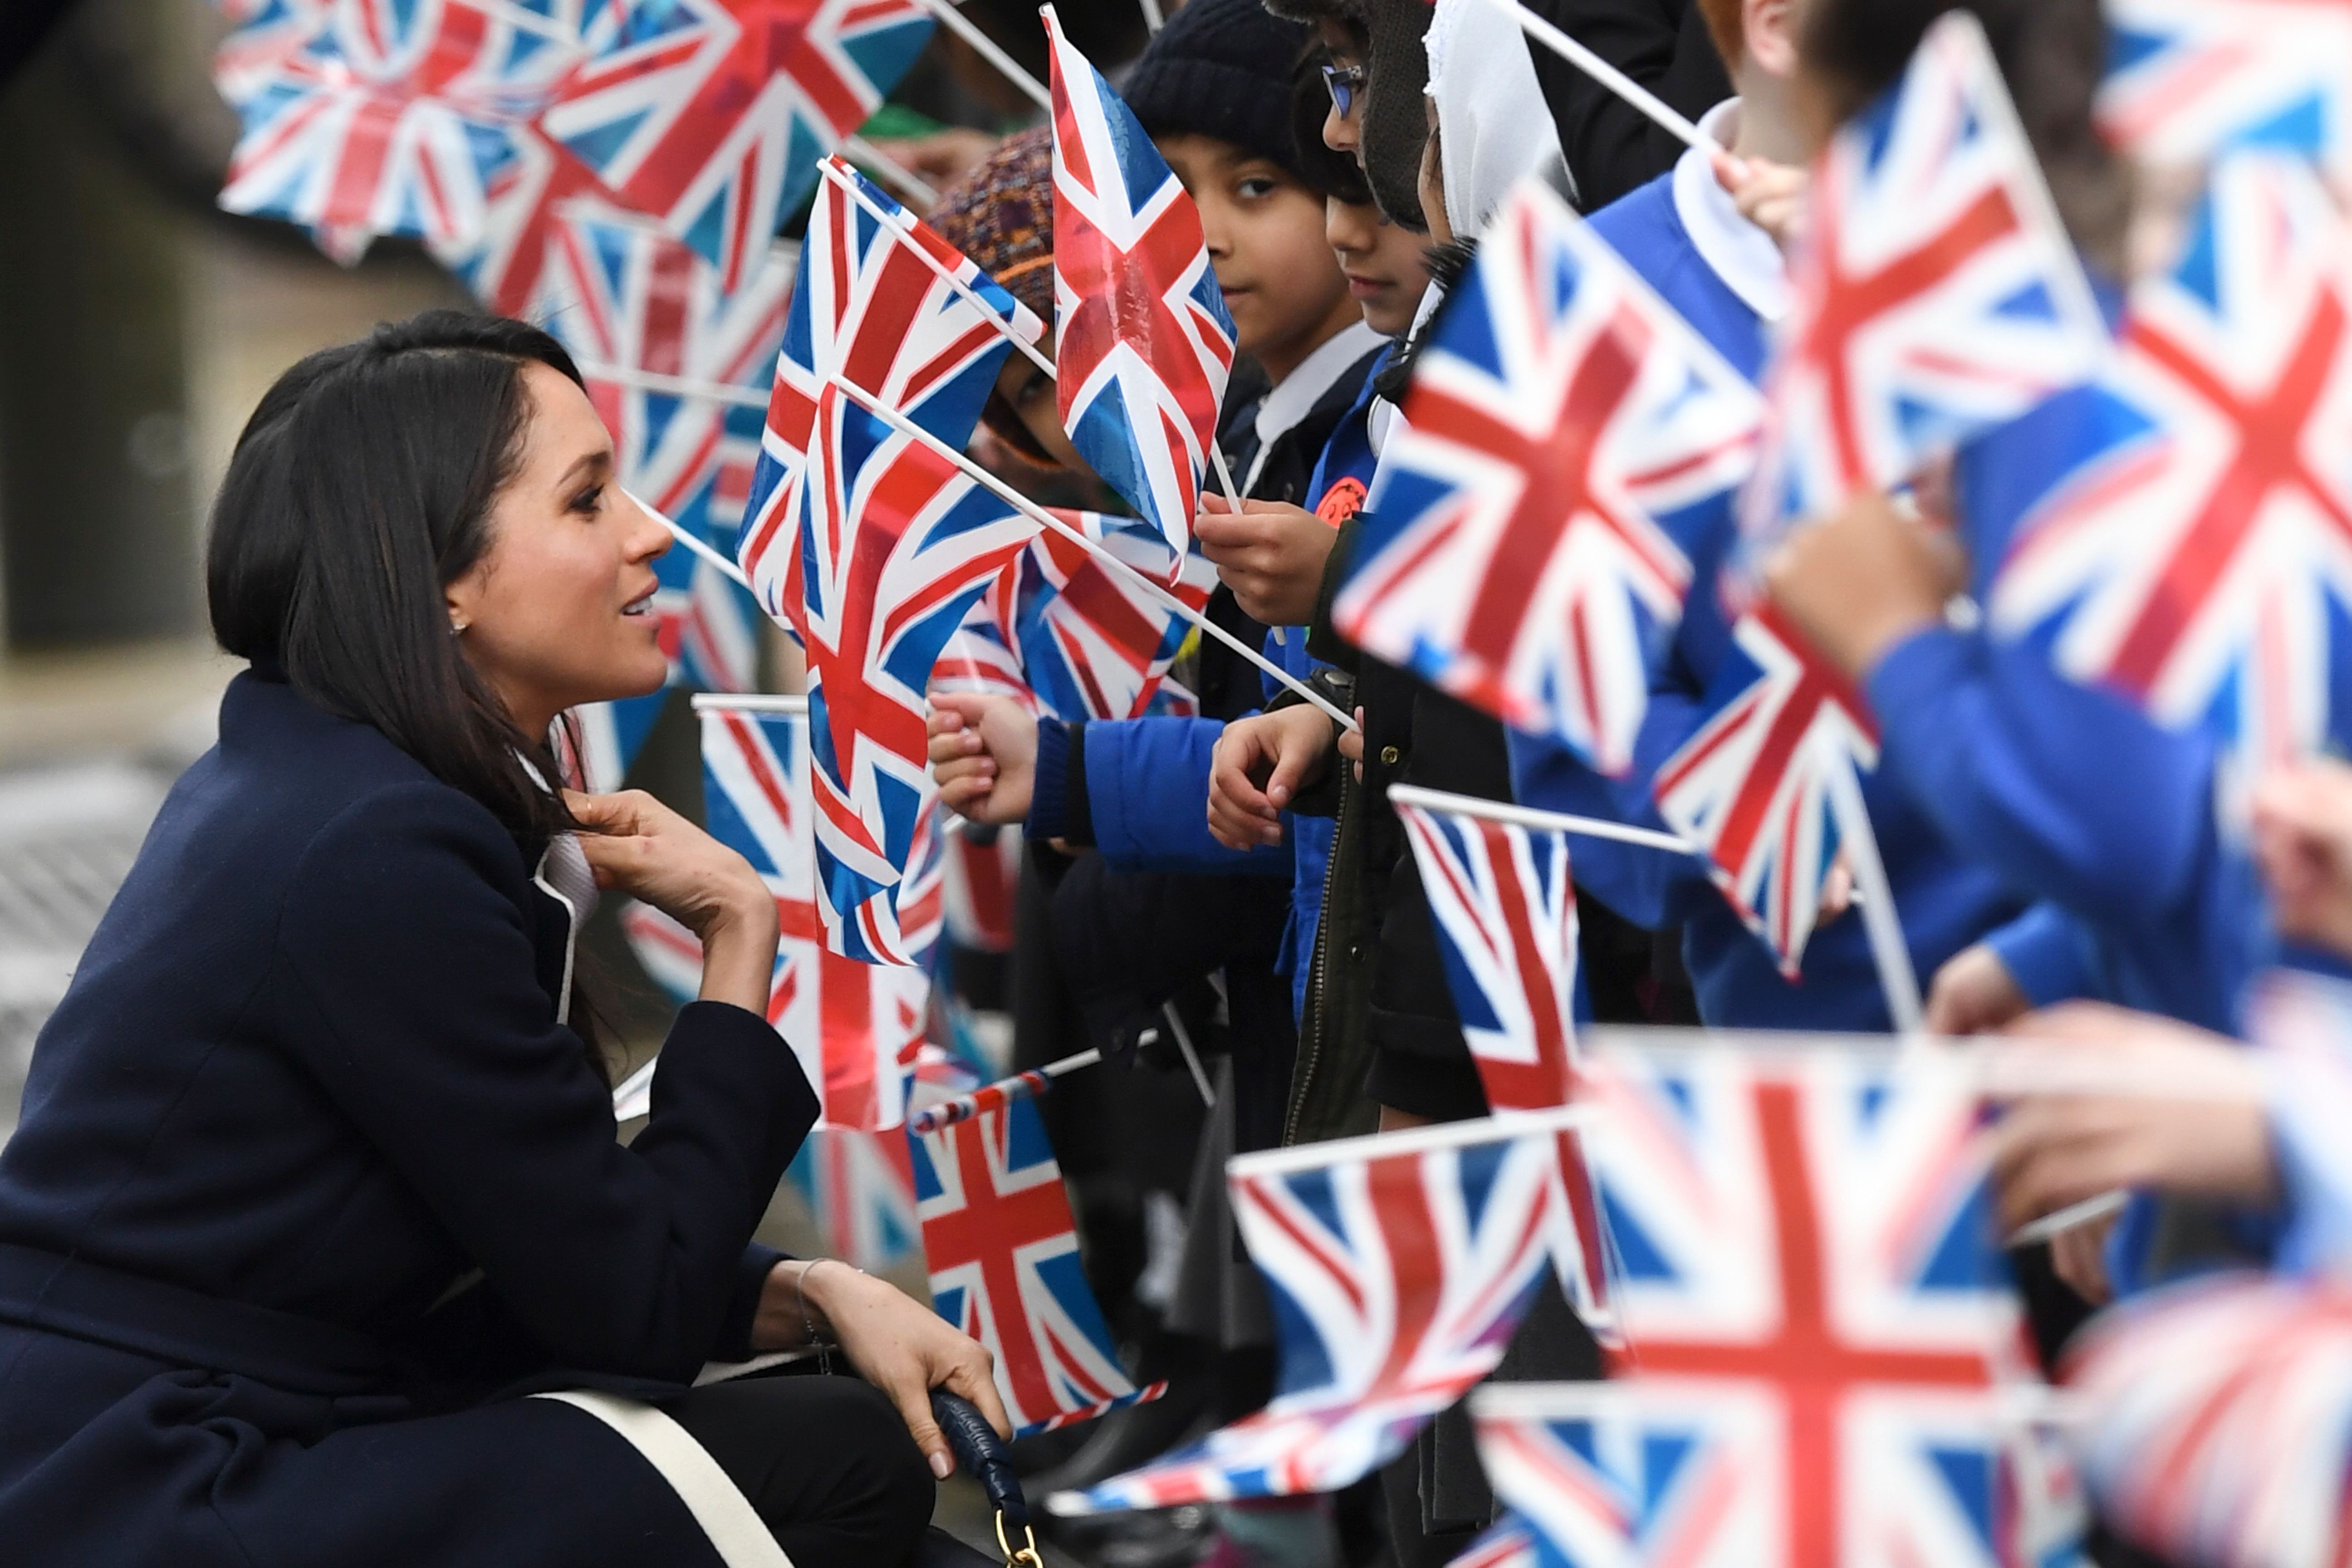 While the wedding ceremony between Prince Harry and Meghan Markle on Saturday will be an exclusive, guests-only event, there are plenty of ways to feel what it’s like to live like a royal. Photo: AFP/Paul Ellis